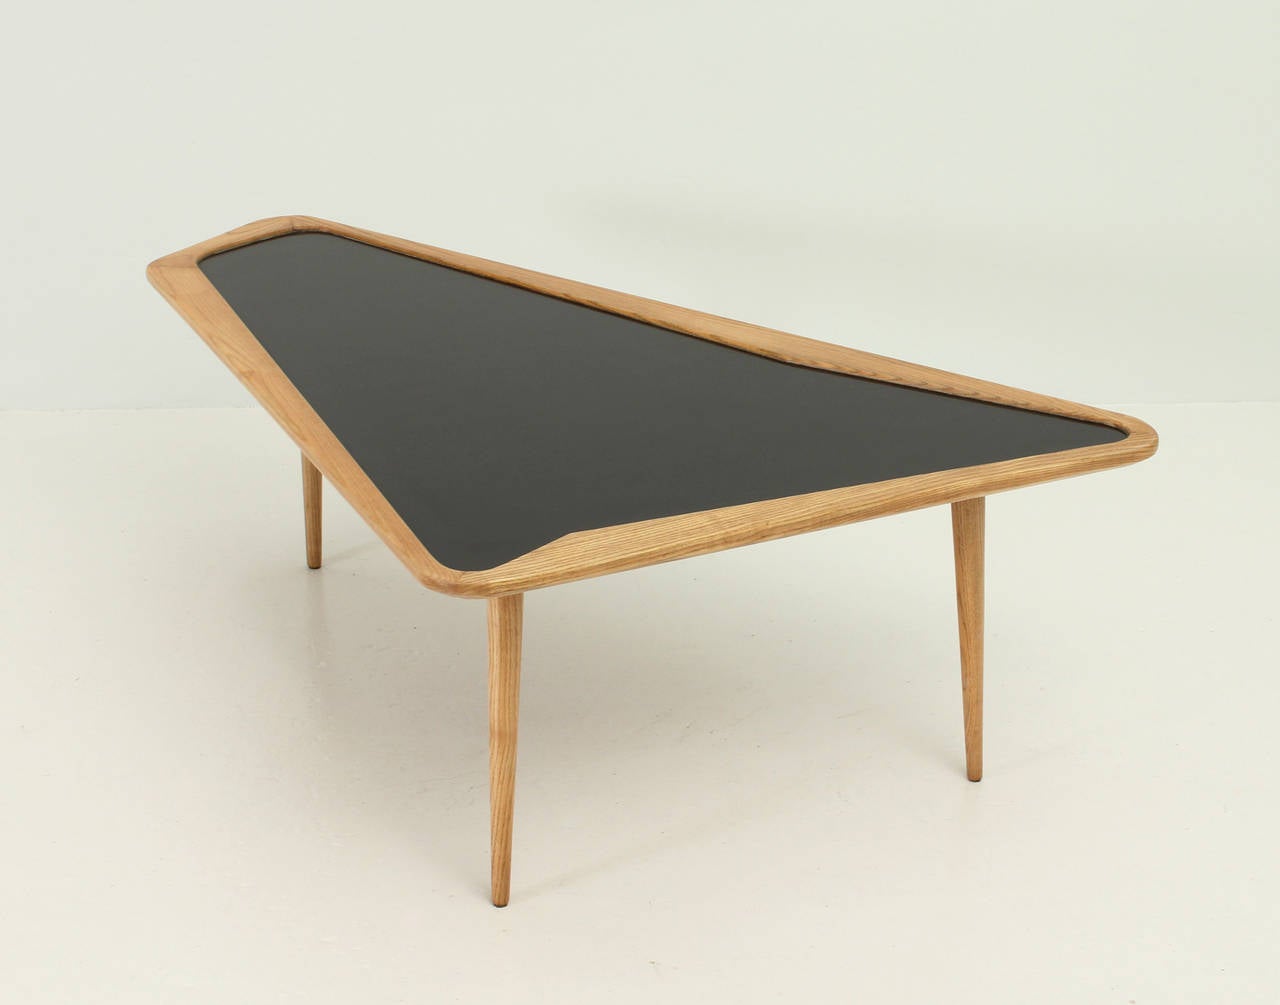 Free-form coffee table designed in 1956 by Charles Ramos, France. Oakwood and laminated top.